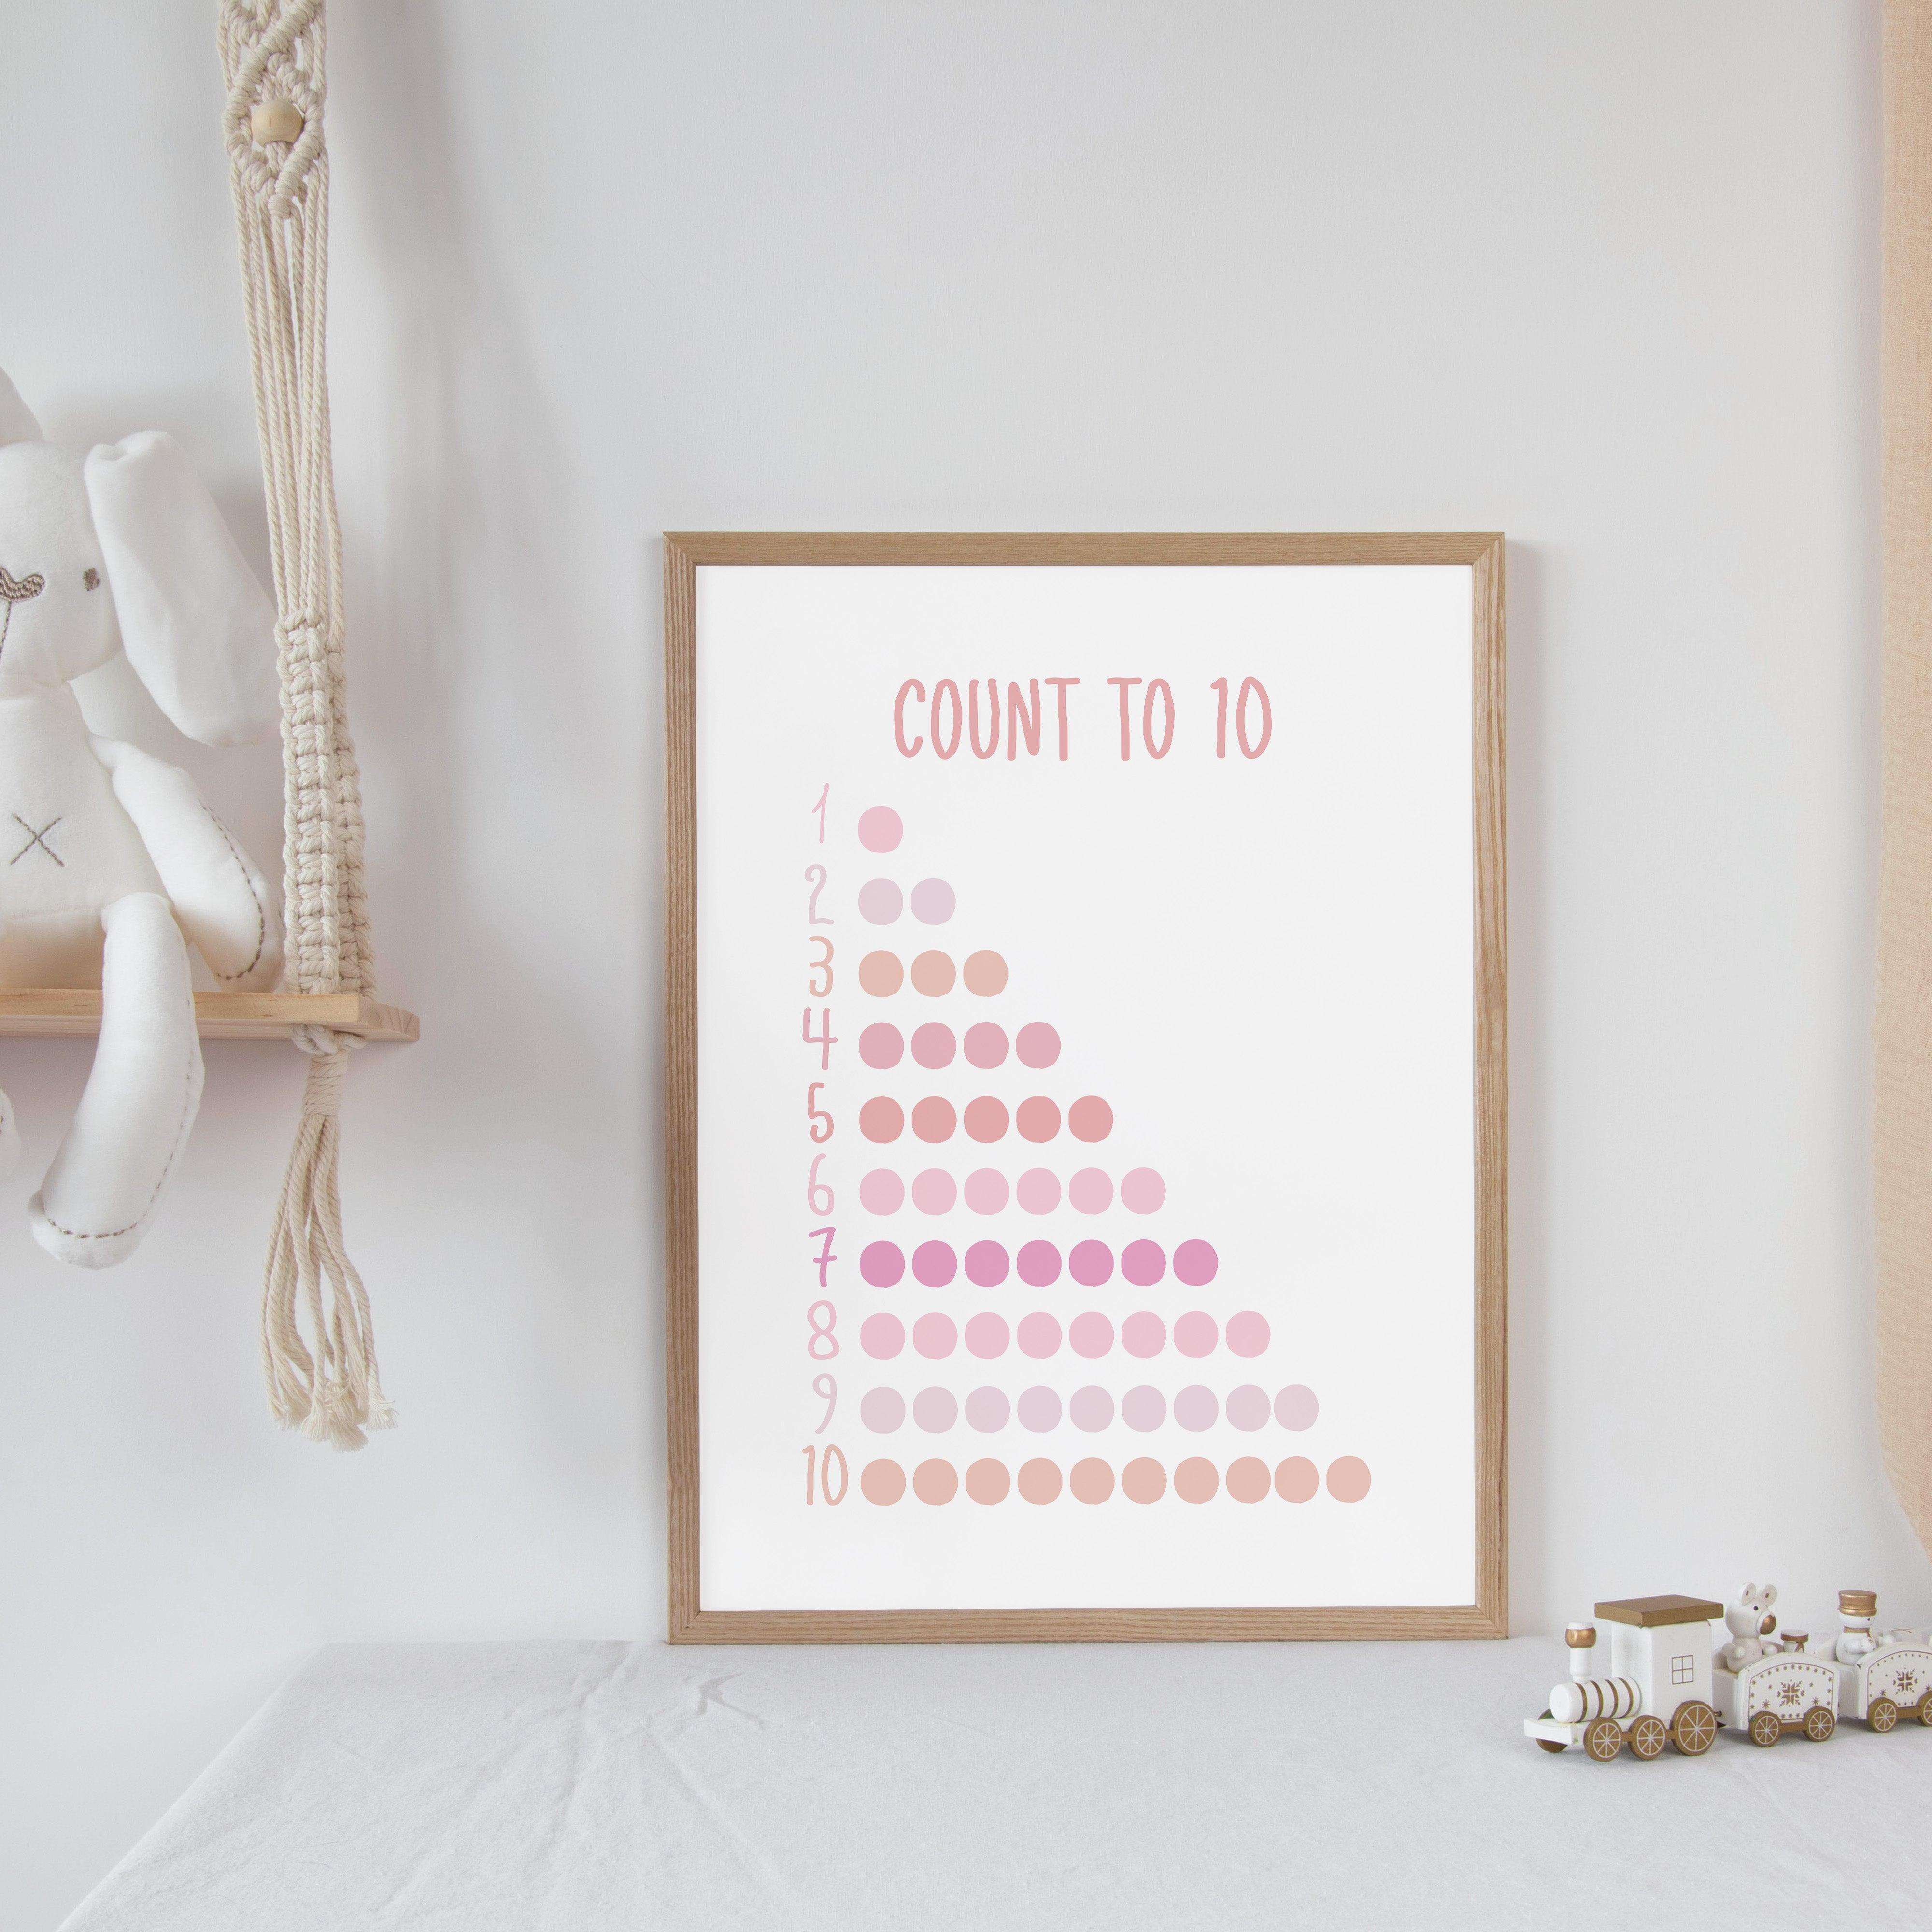 Count To 10 - Pink Tones - Educational Print Series - Poster - The Willow Corner